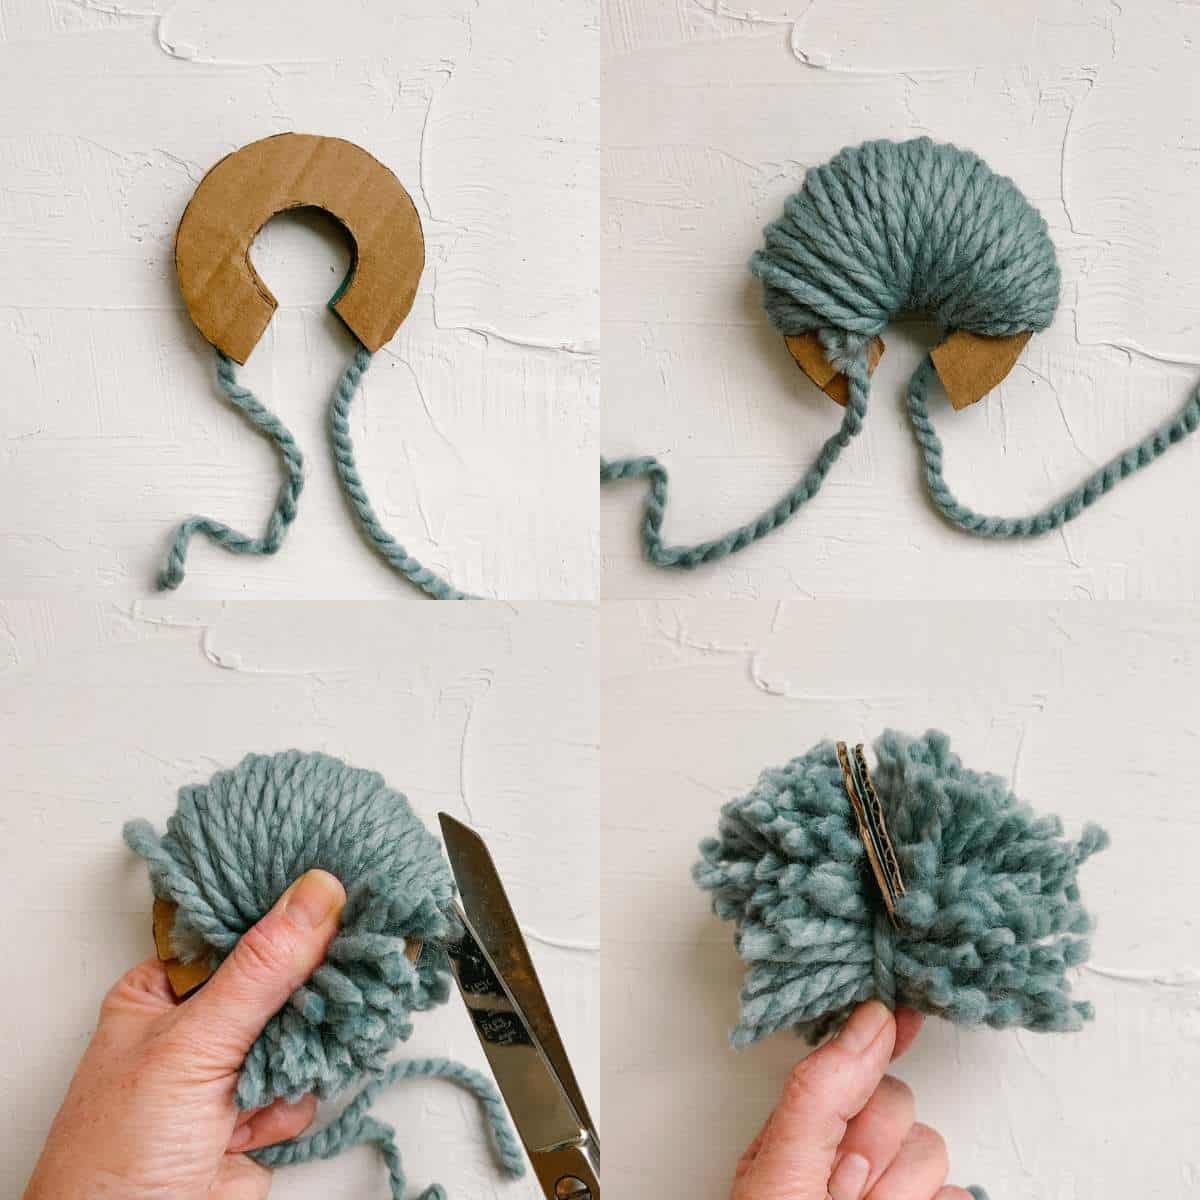 Step-by-step pictures of making a pom pom by hand.